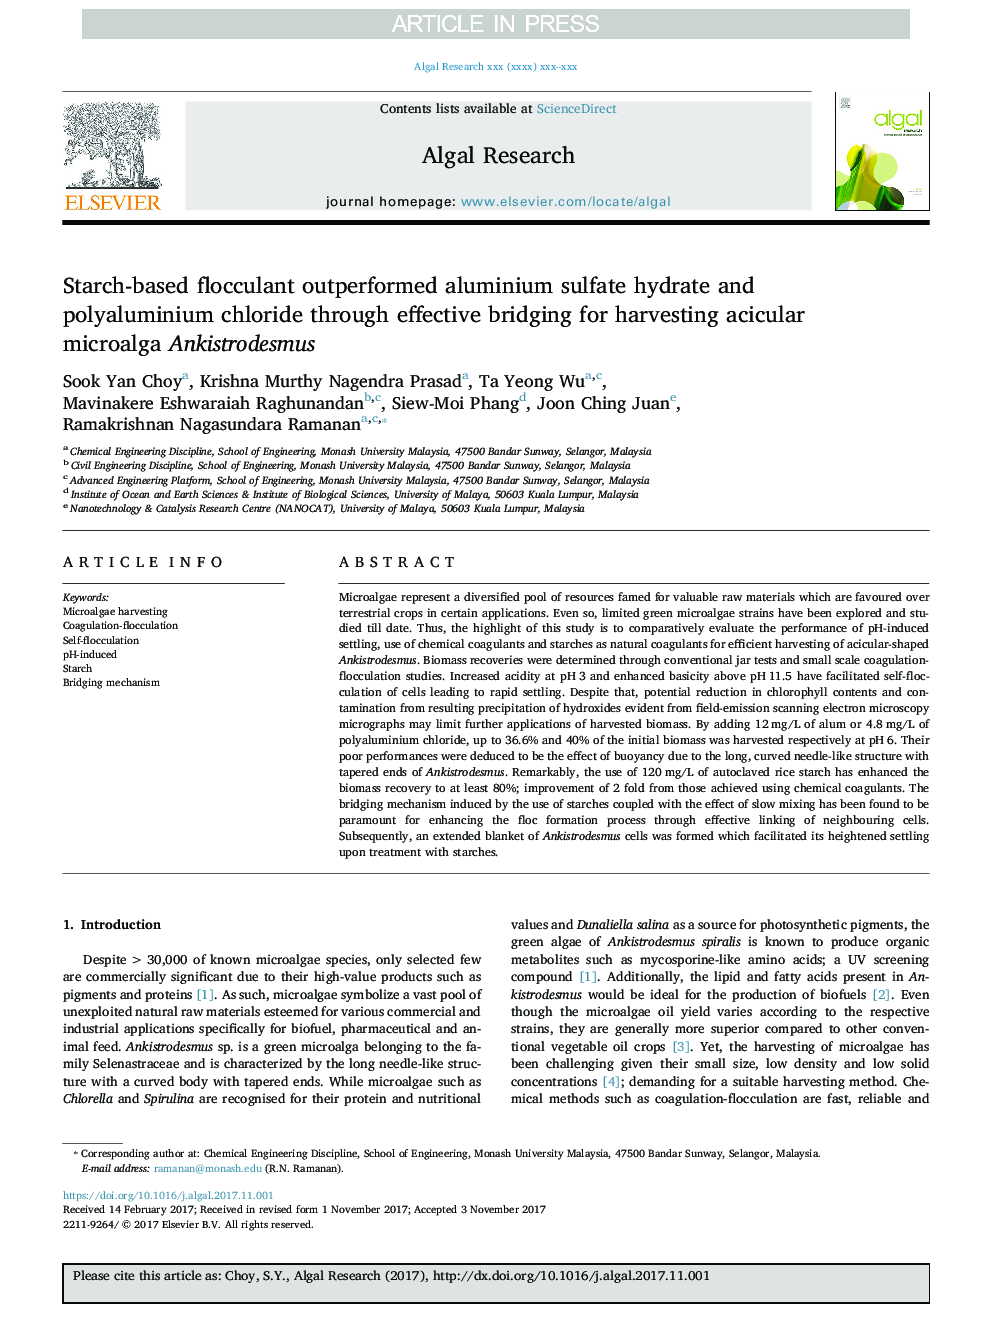 Starch-based flocculant outperformed aluminium sulfate hydrate and polyaluminium chloride through effective bridging for harvesting acicular microalga Ankistrodesmus